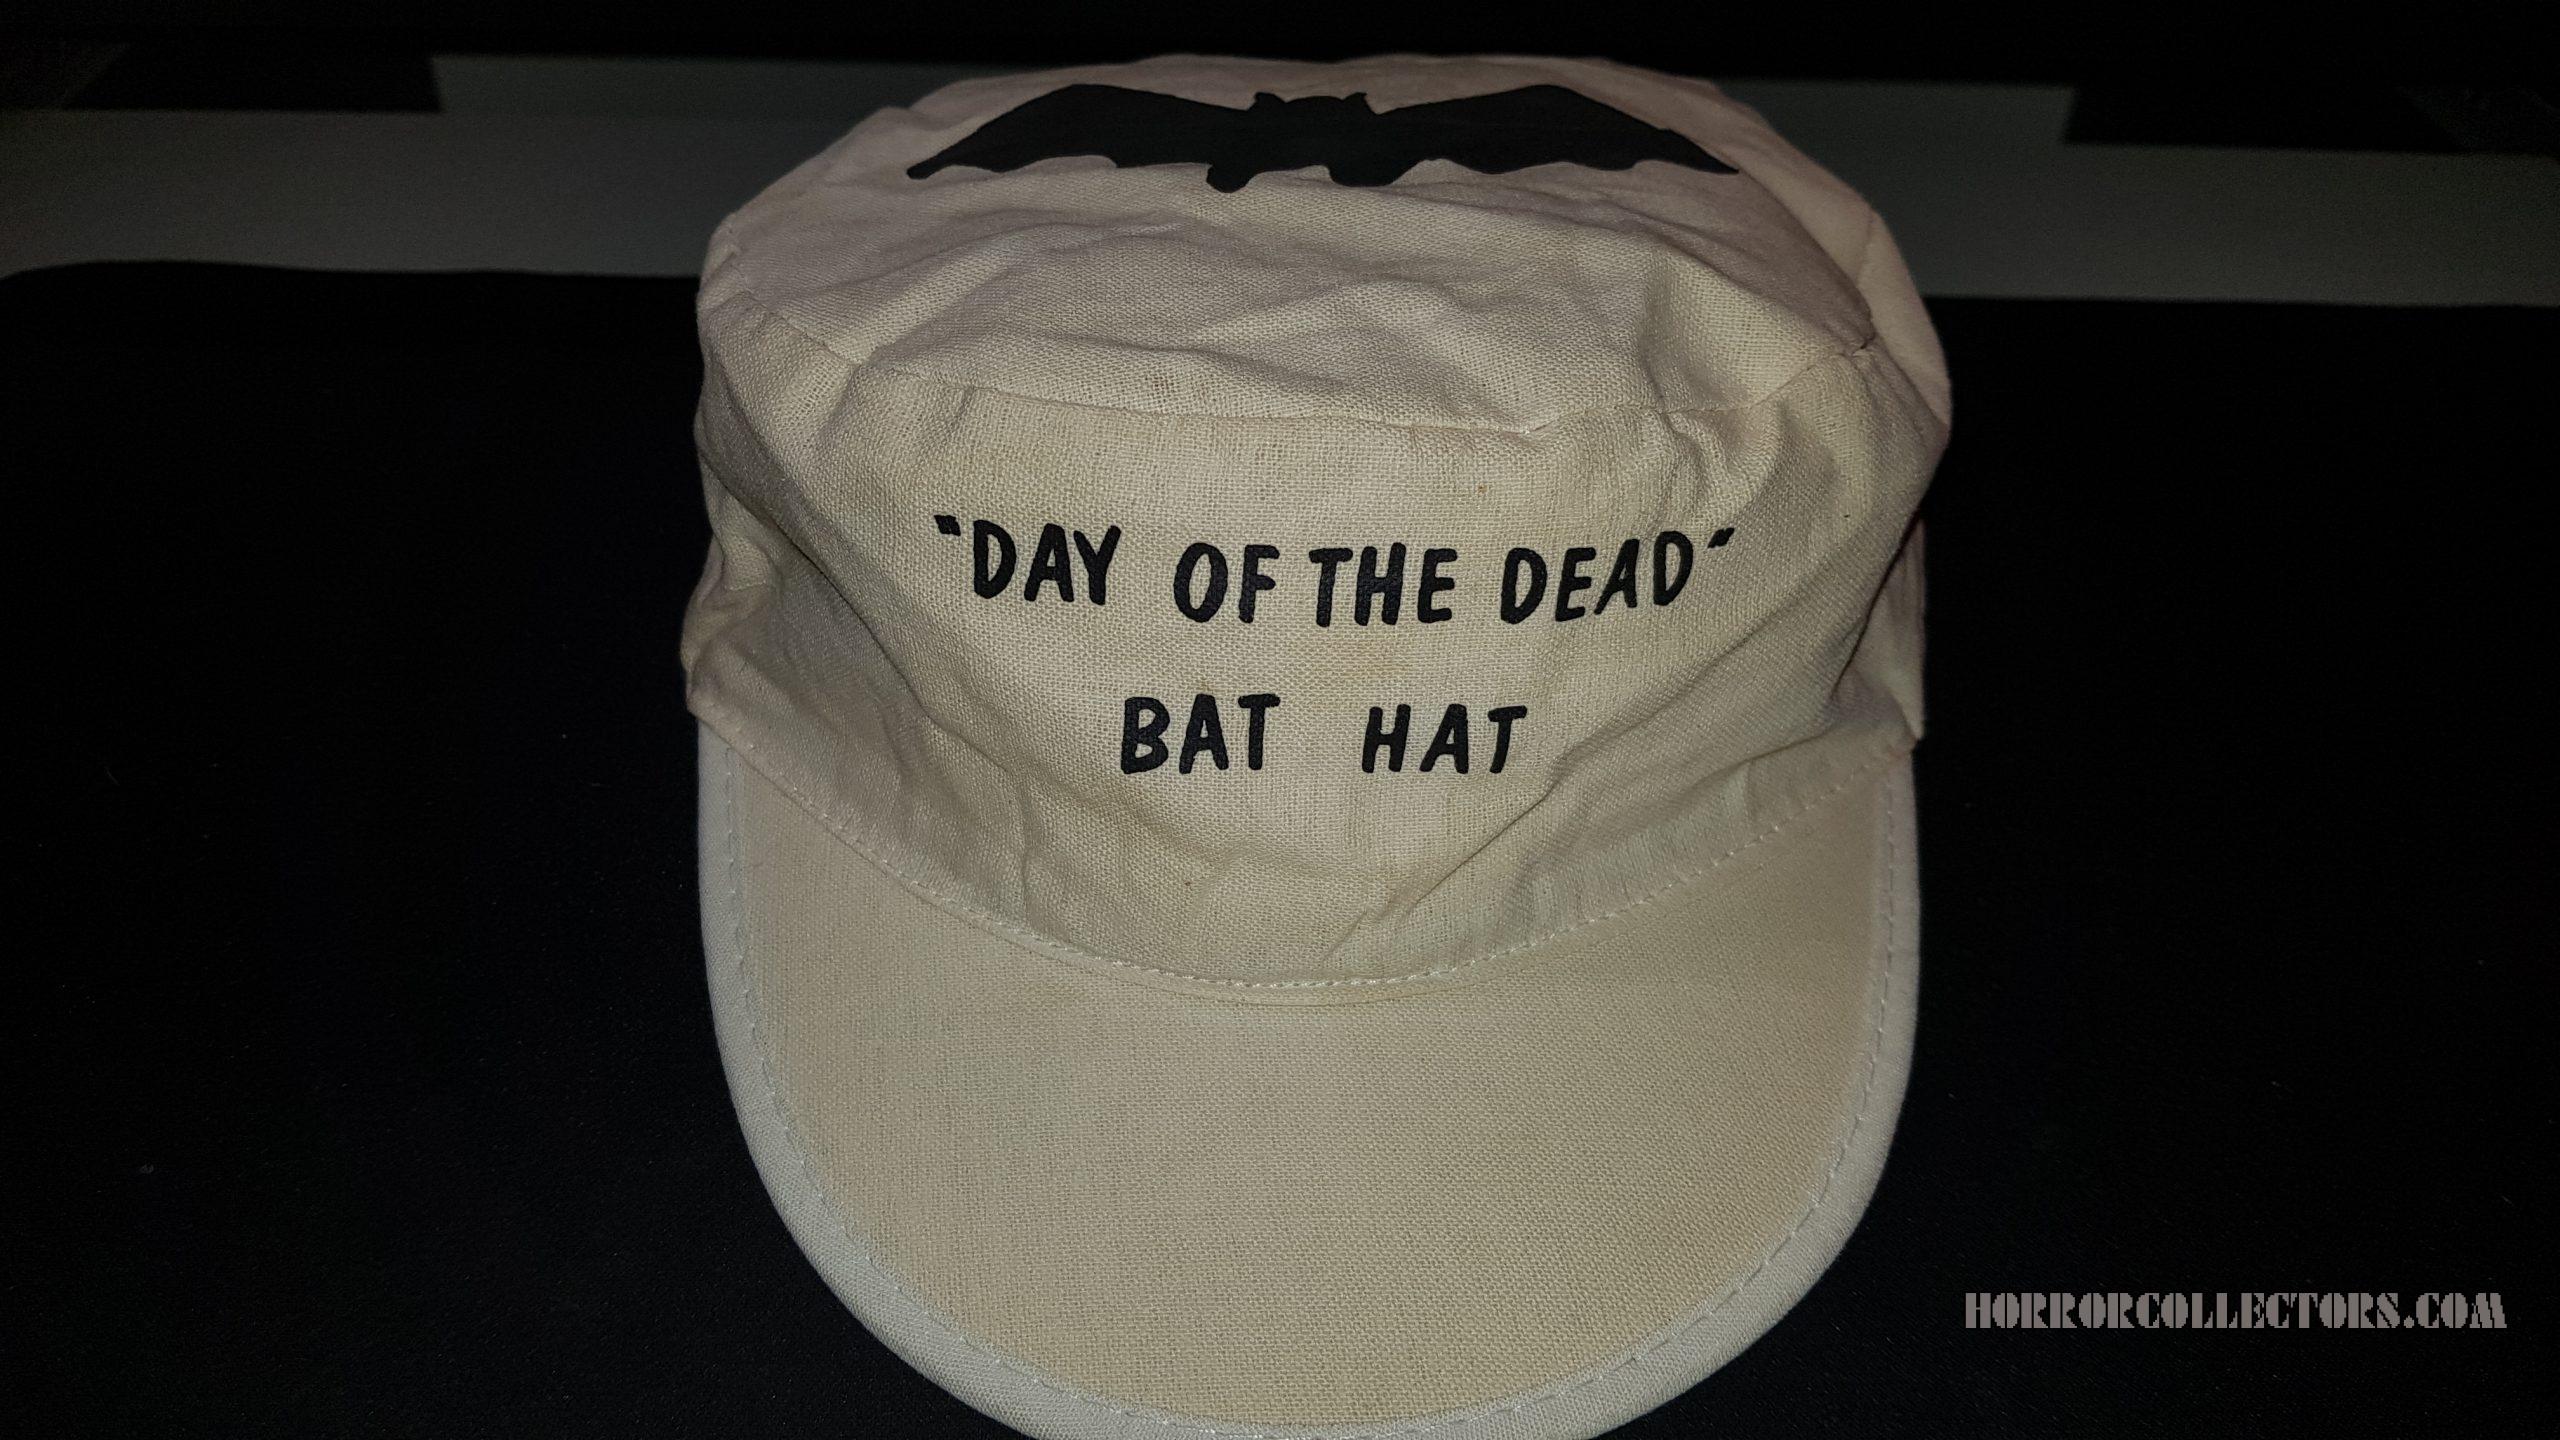 Day of the Dead Bat Hat Ultra Rare